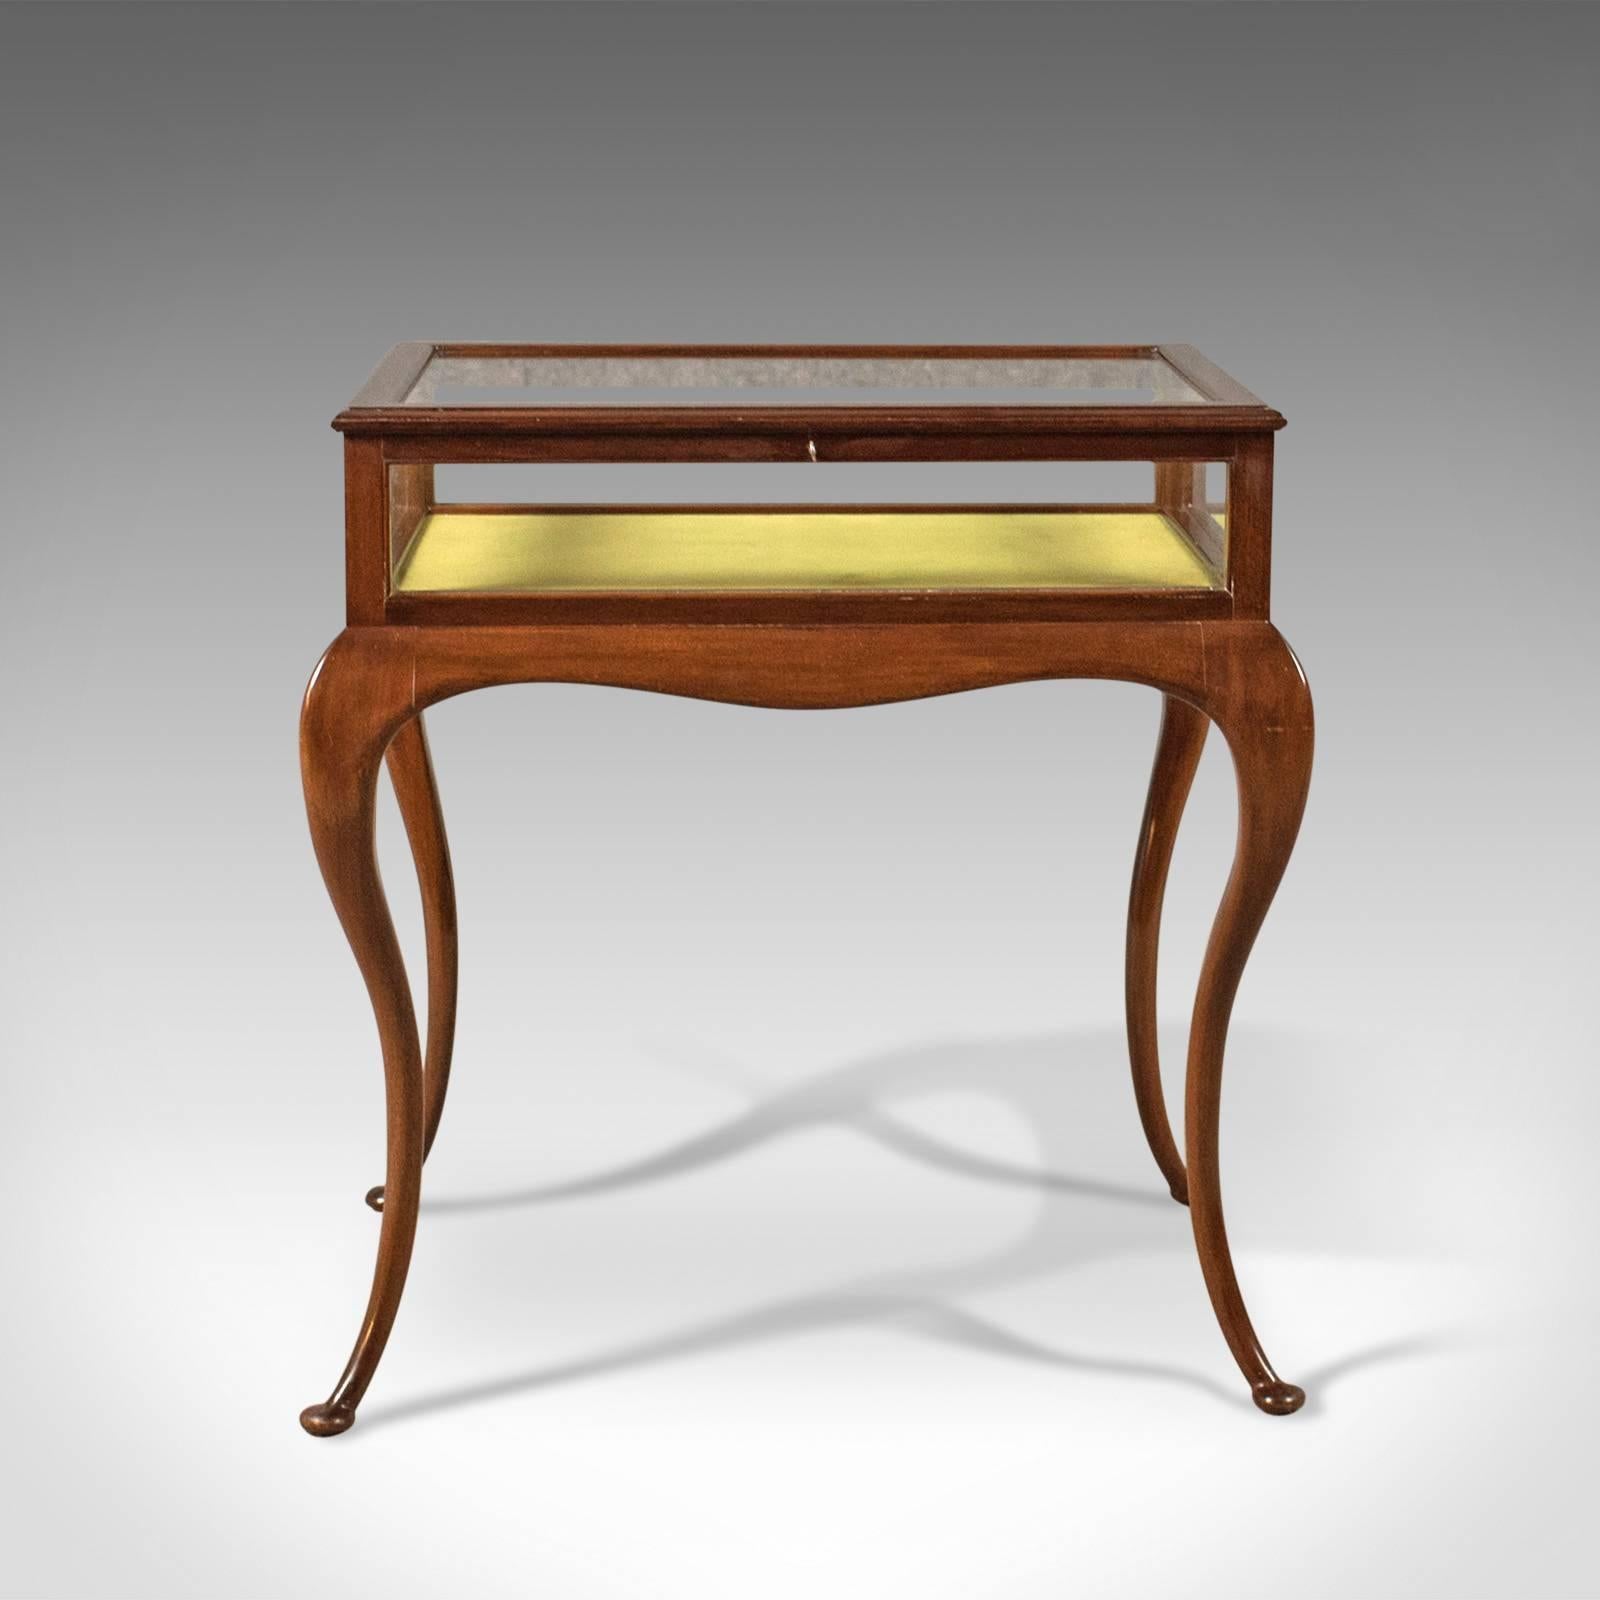 This is an antique bijouterie table, dating to the reign of George V, English, circa 1915.

Beautifully made in select mahogany with a polished finish
The case finished in thick, beaded glazing complete with working lock and key
Lined with a